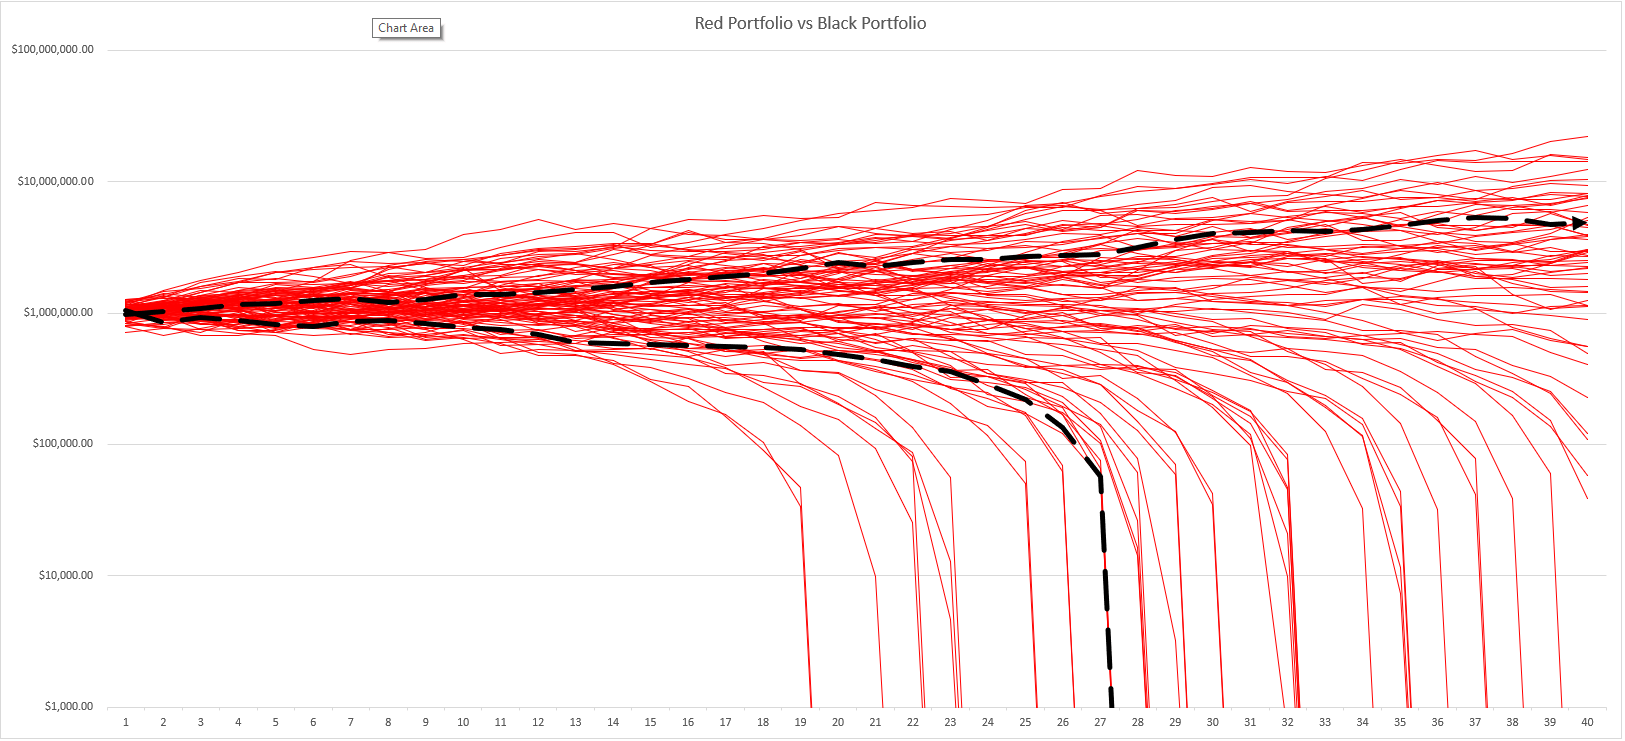 Monte Carlo safe withdrawal rate line chart